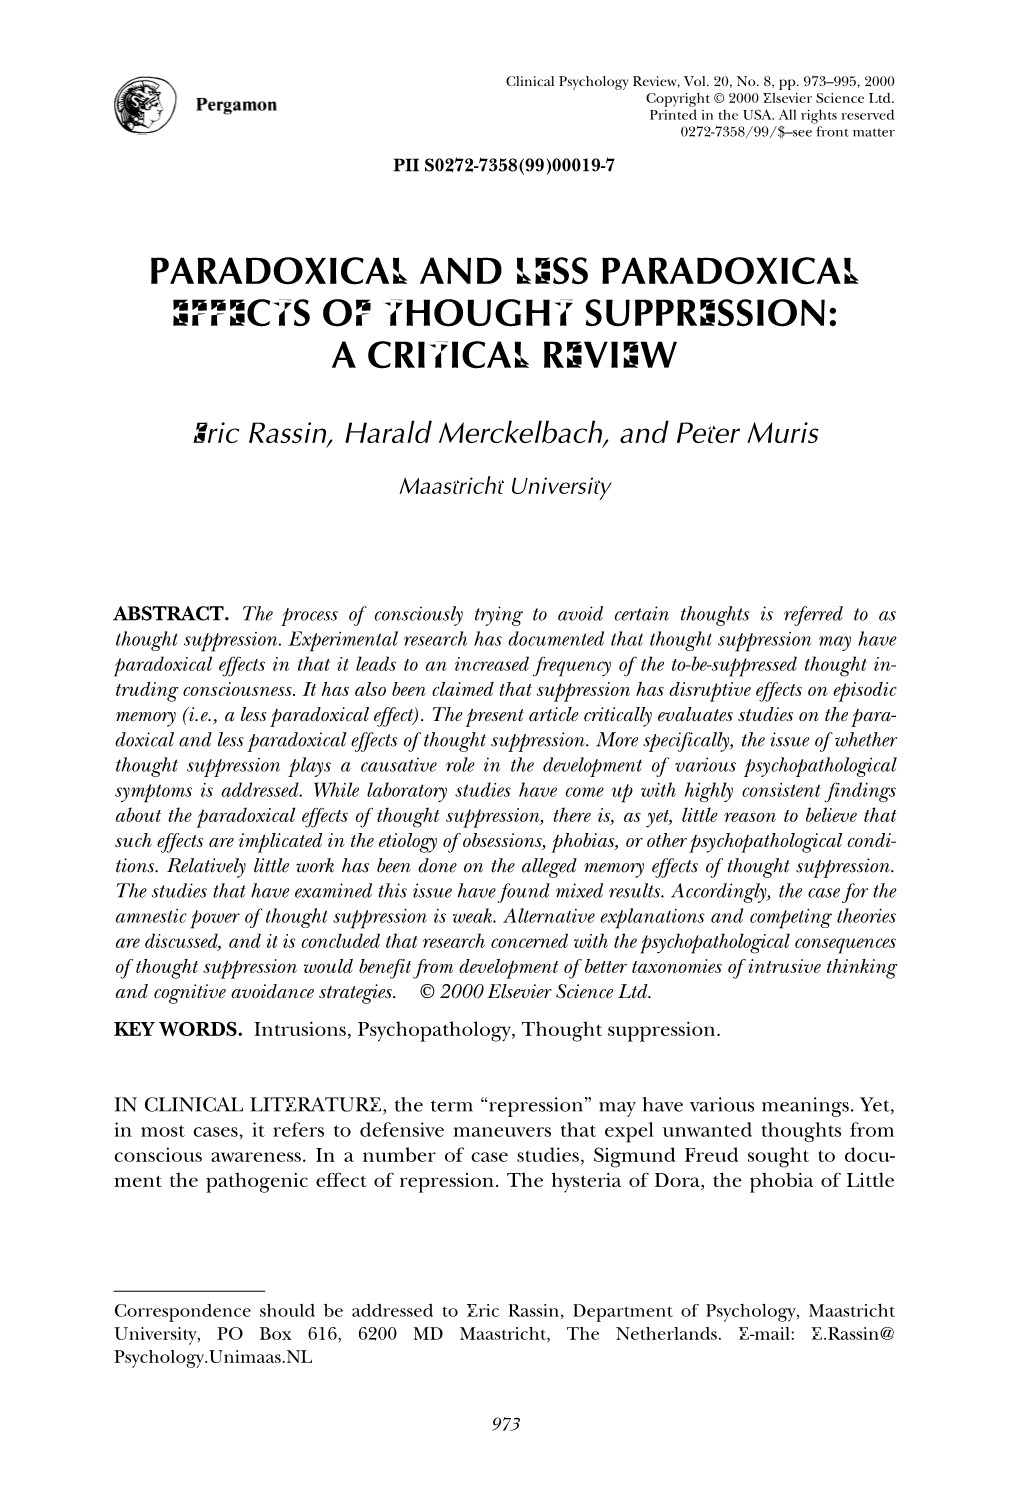 Paradoxical and Less Paradoxical Effects of Thought Suppression: a Critical Review